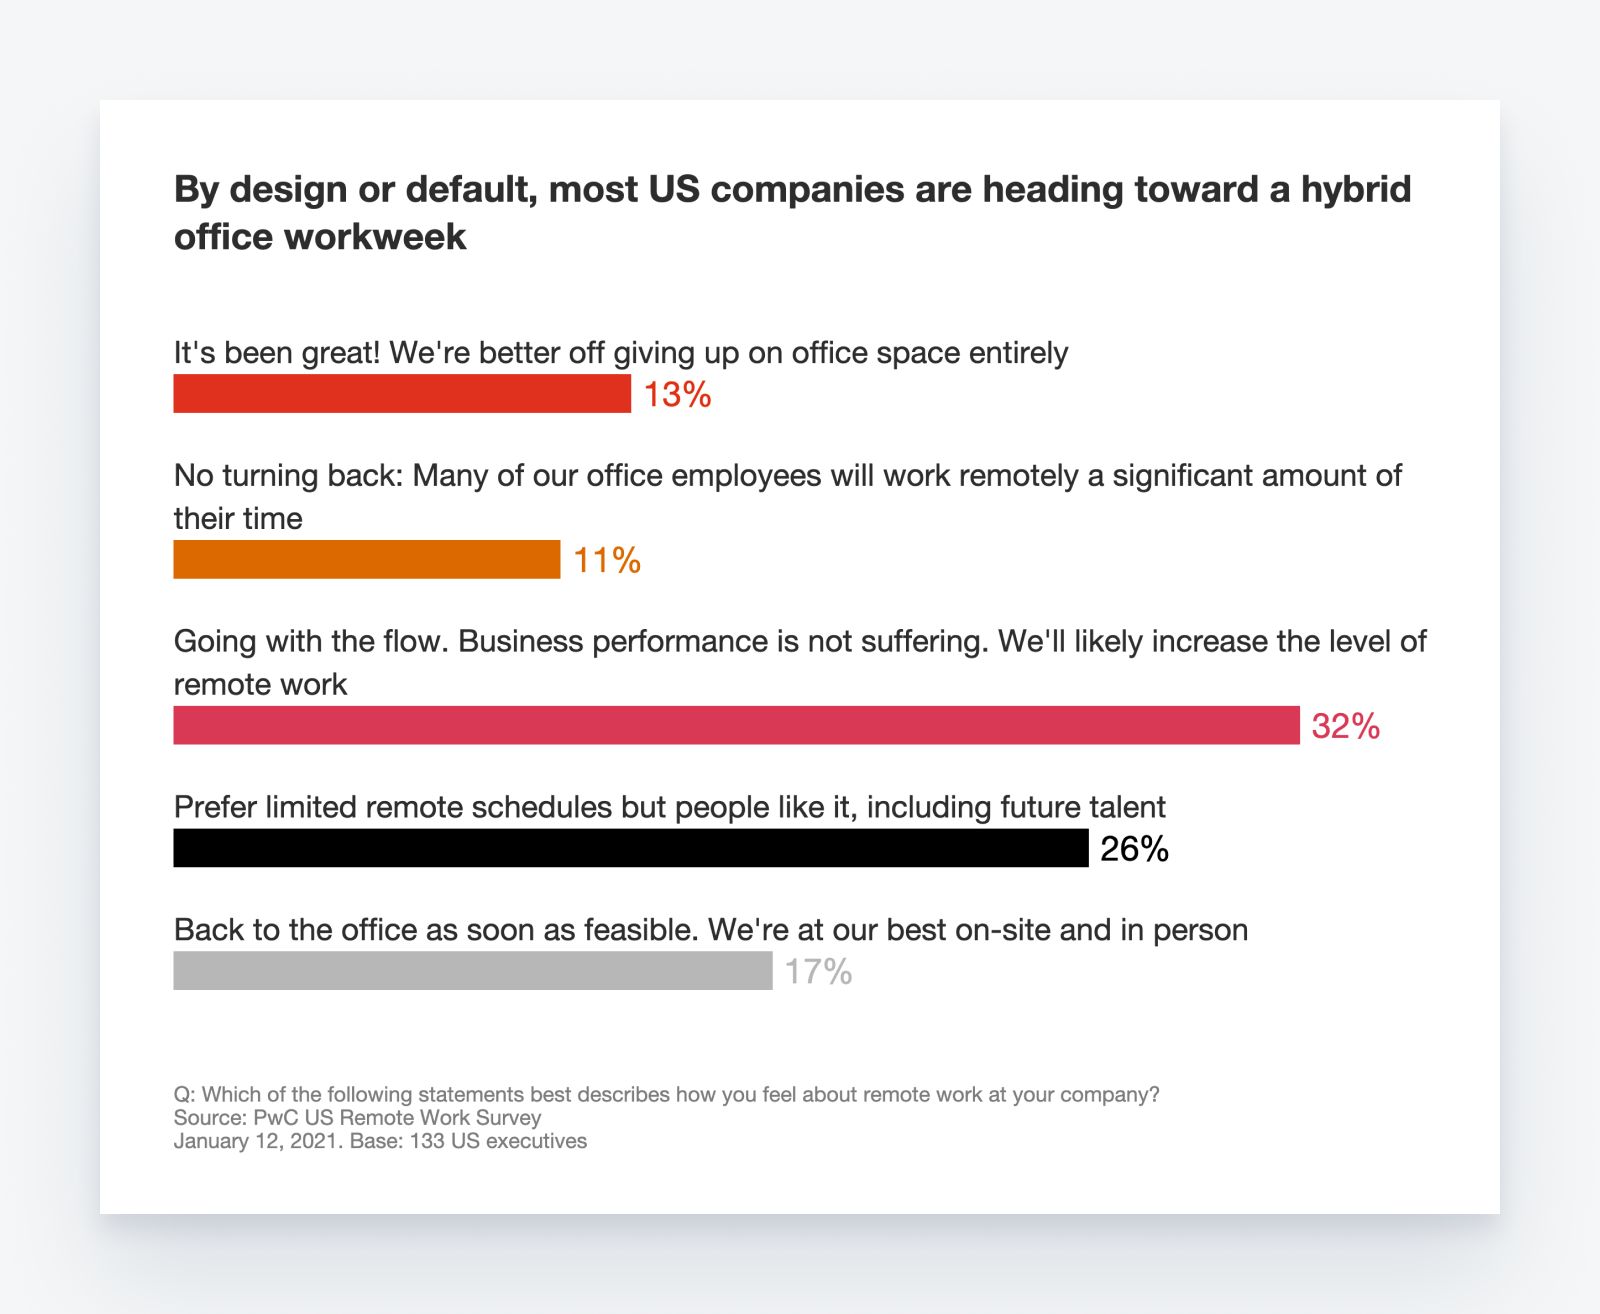 By design or default, most US companies are heading toward a hybrid office workweek - PwC 2021